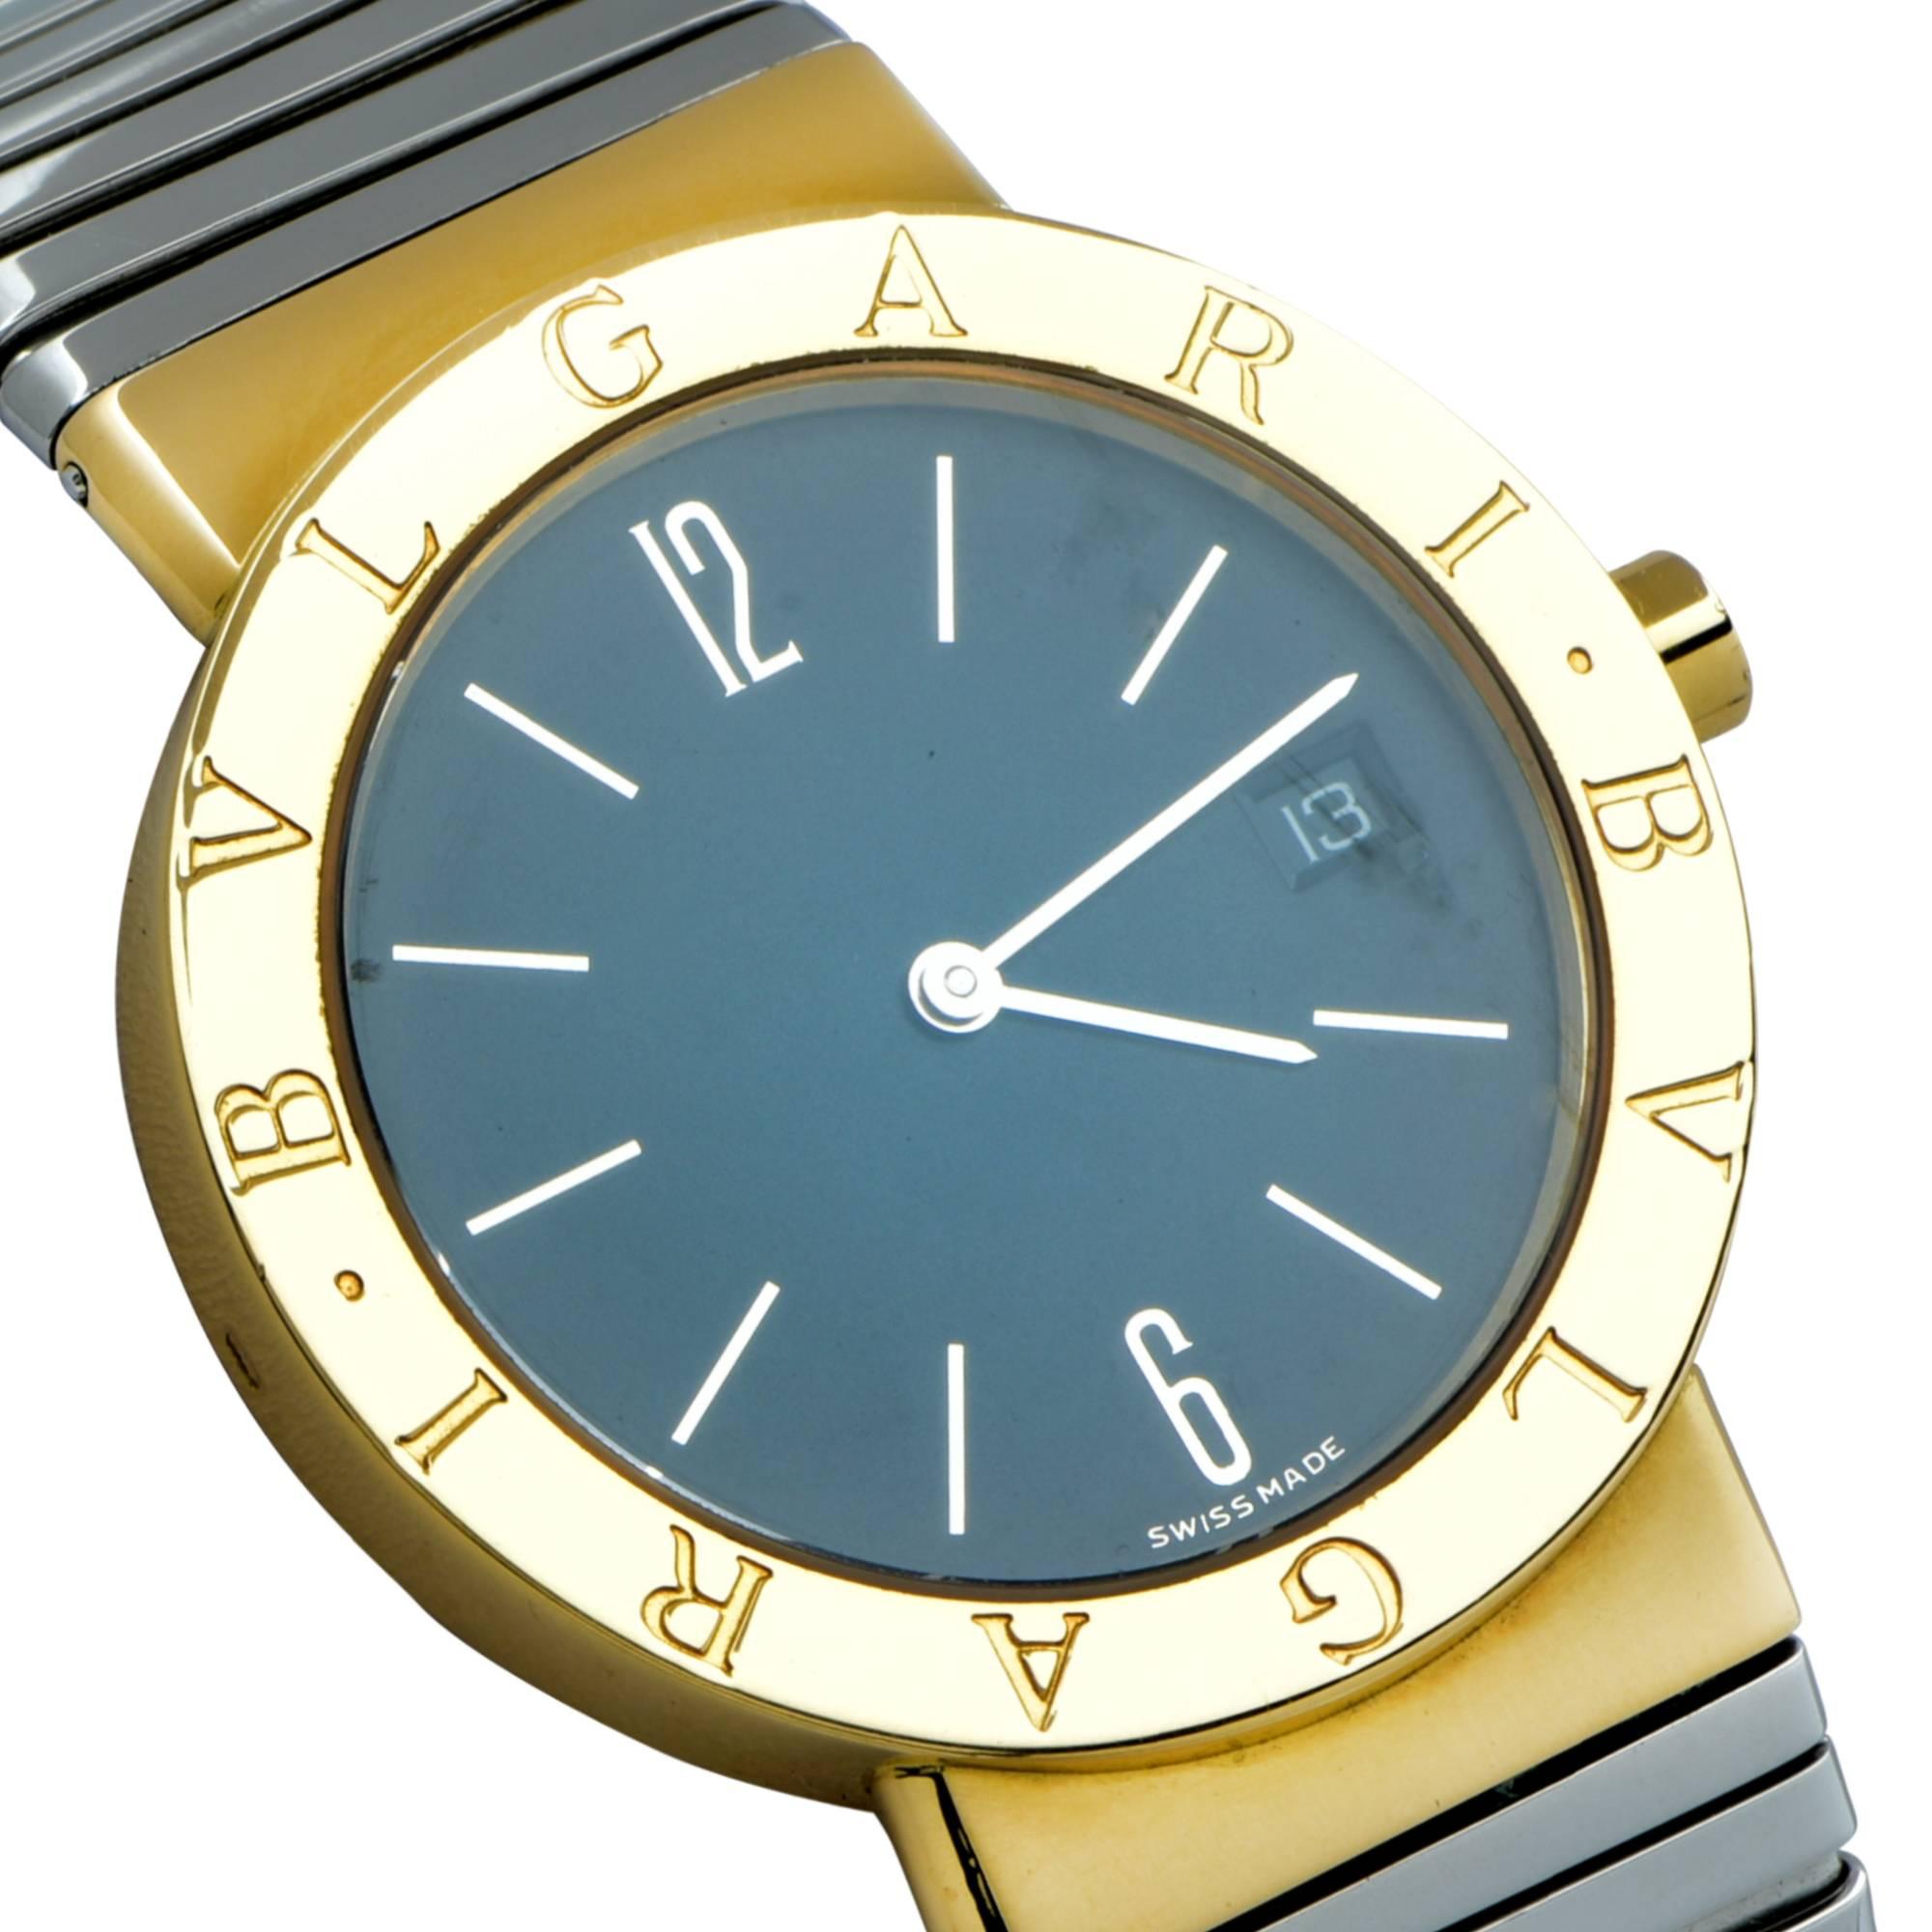 From the House of Bvlgari, this sleek Tubogas 18 Karat Yellow Gold and Stainless Steel Quartz watch with date, features a round black face framed in 18 karat yellow gold, measuring 33 mm in diameter with an adjustable stainless steel bracelet strap